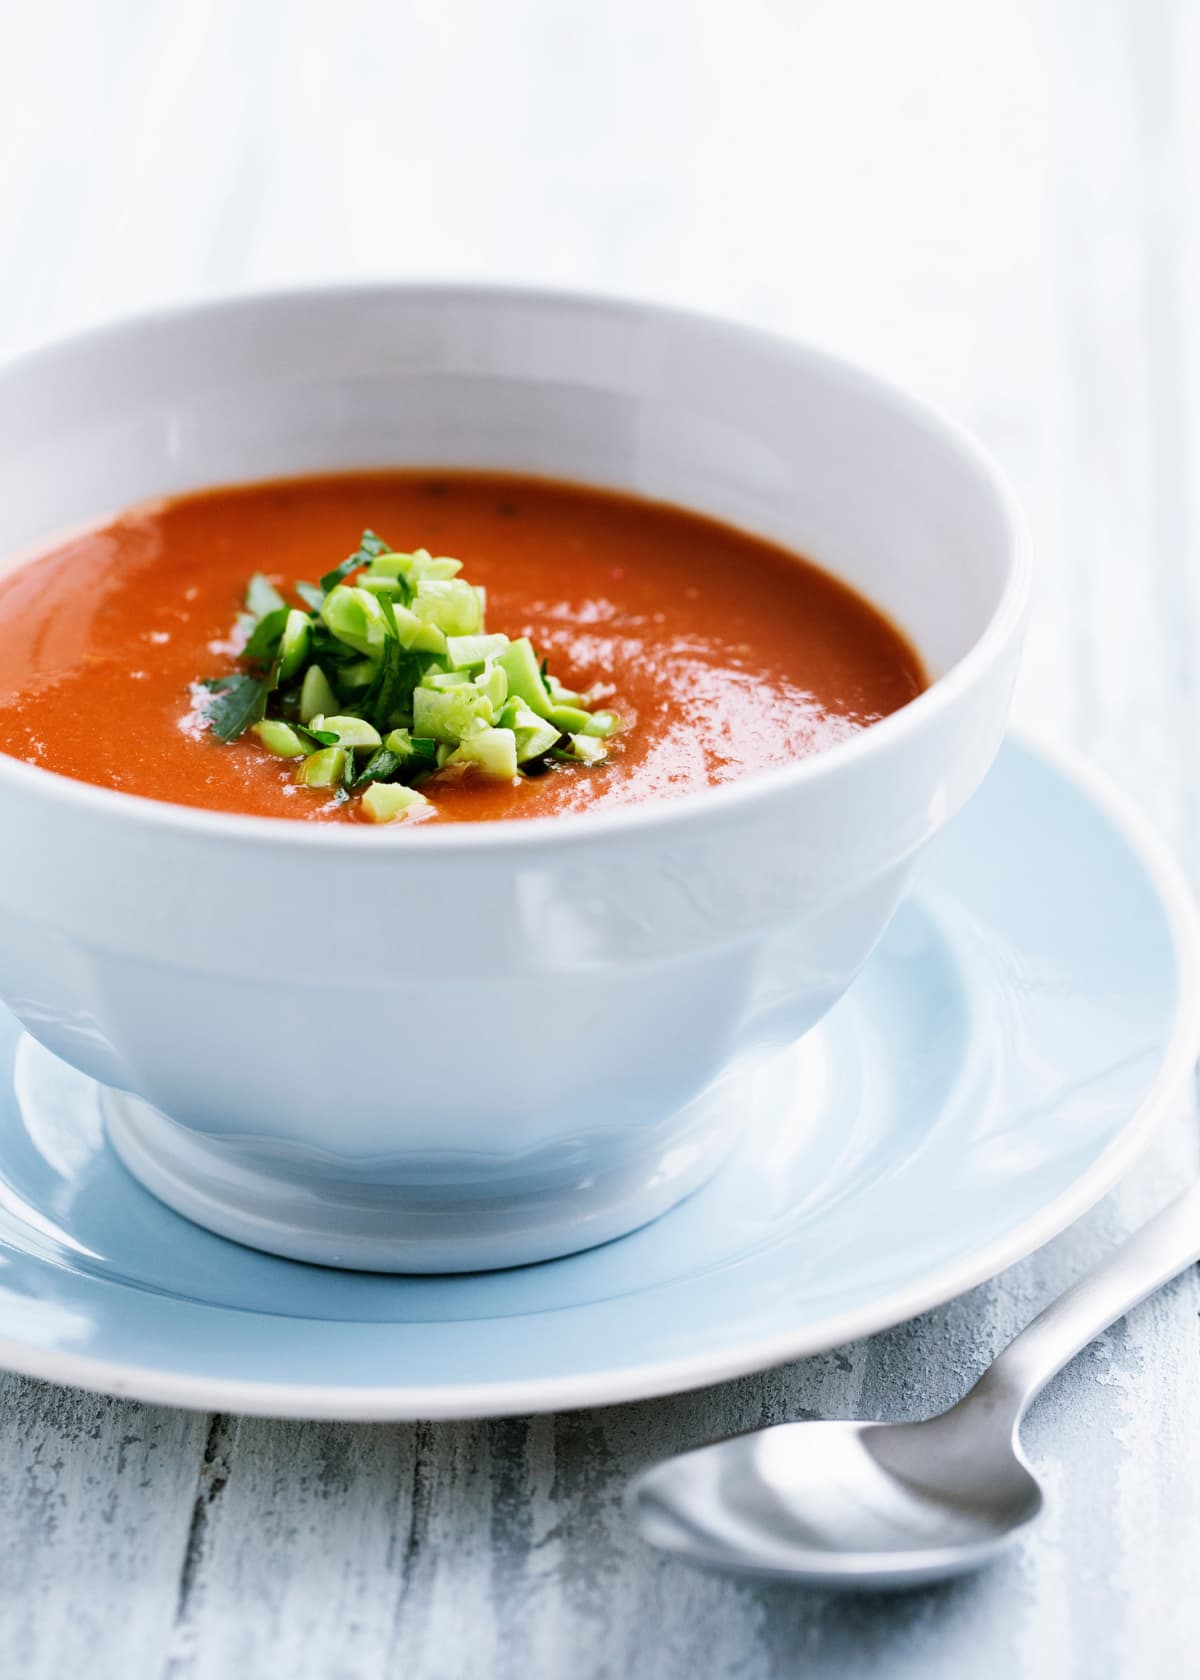 A bowl of tomato soup with a leek garnish